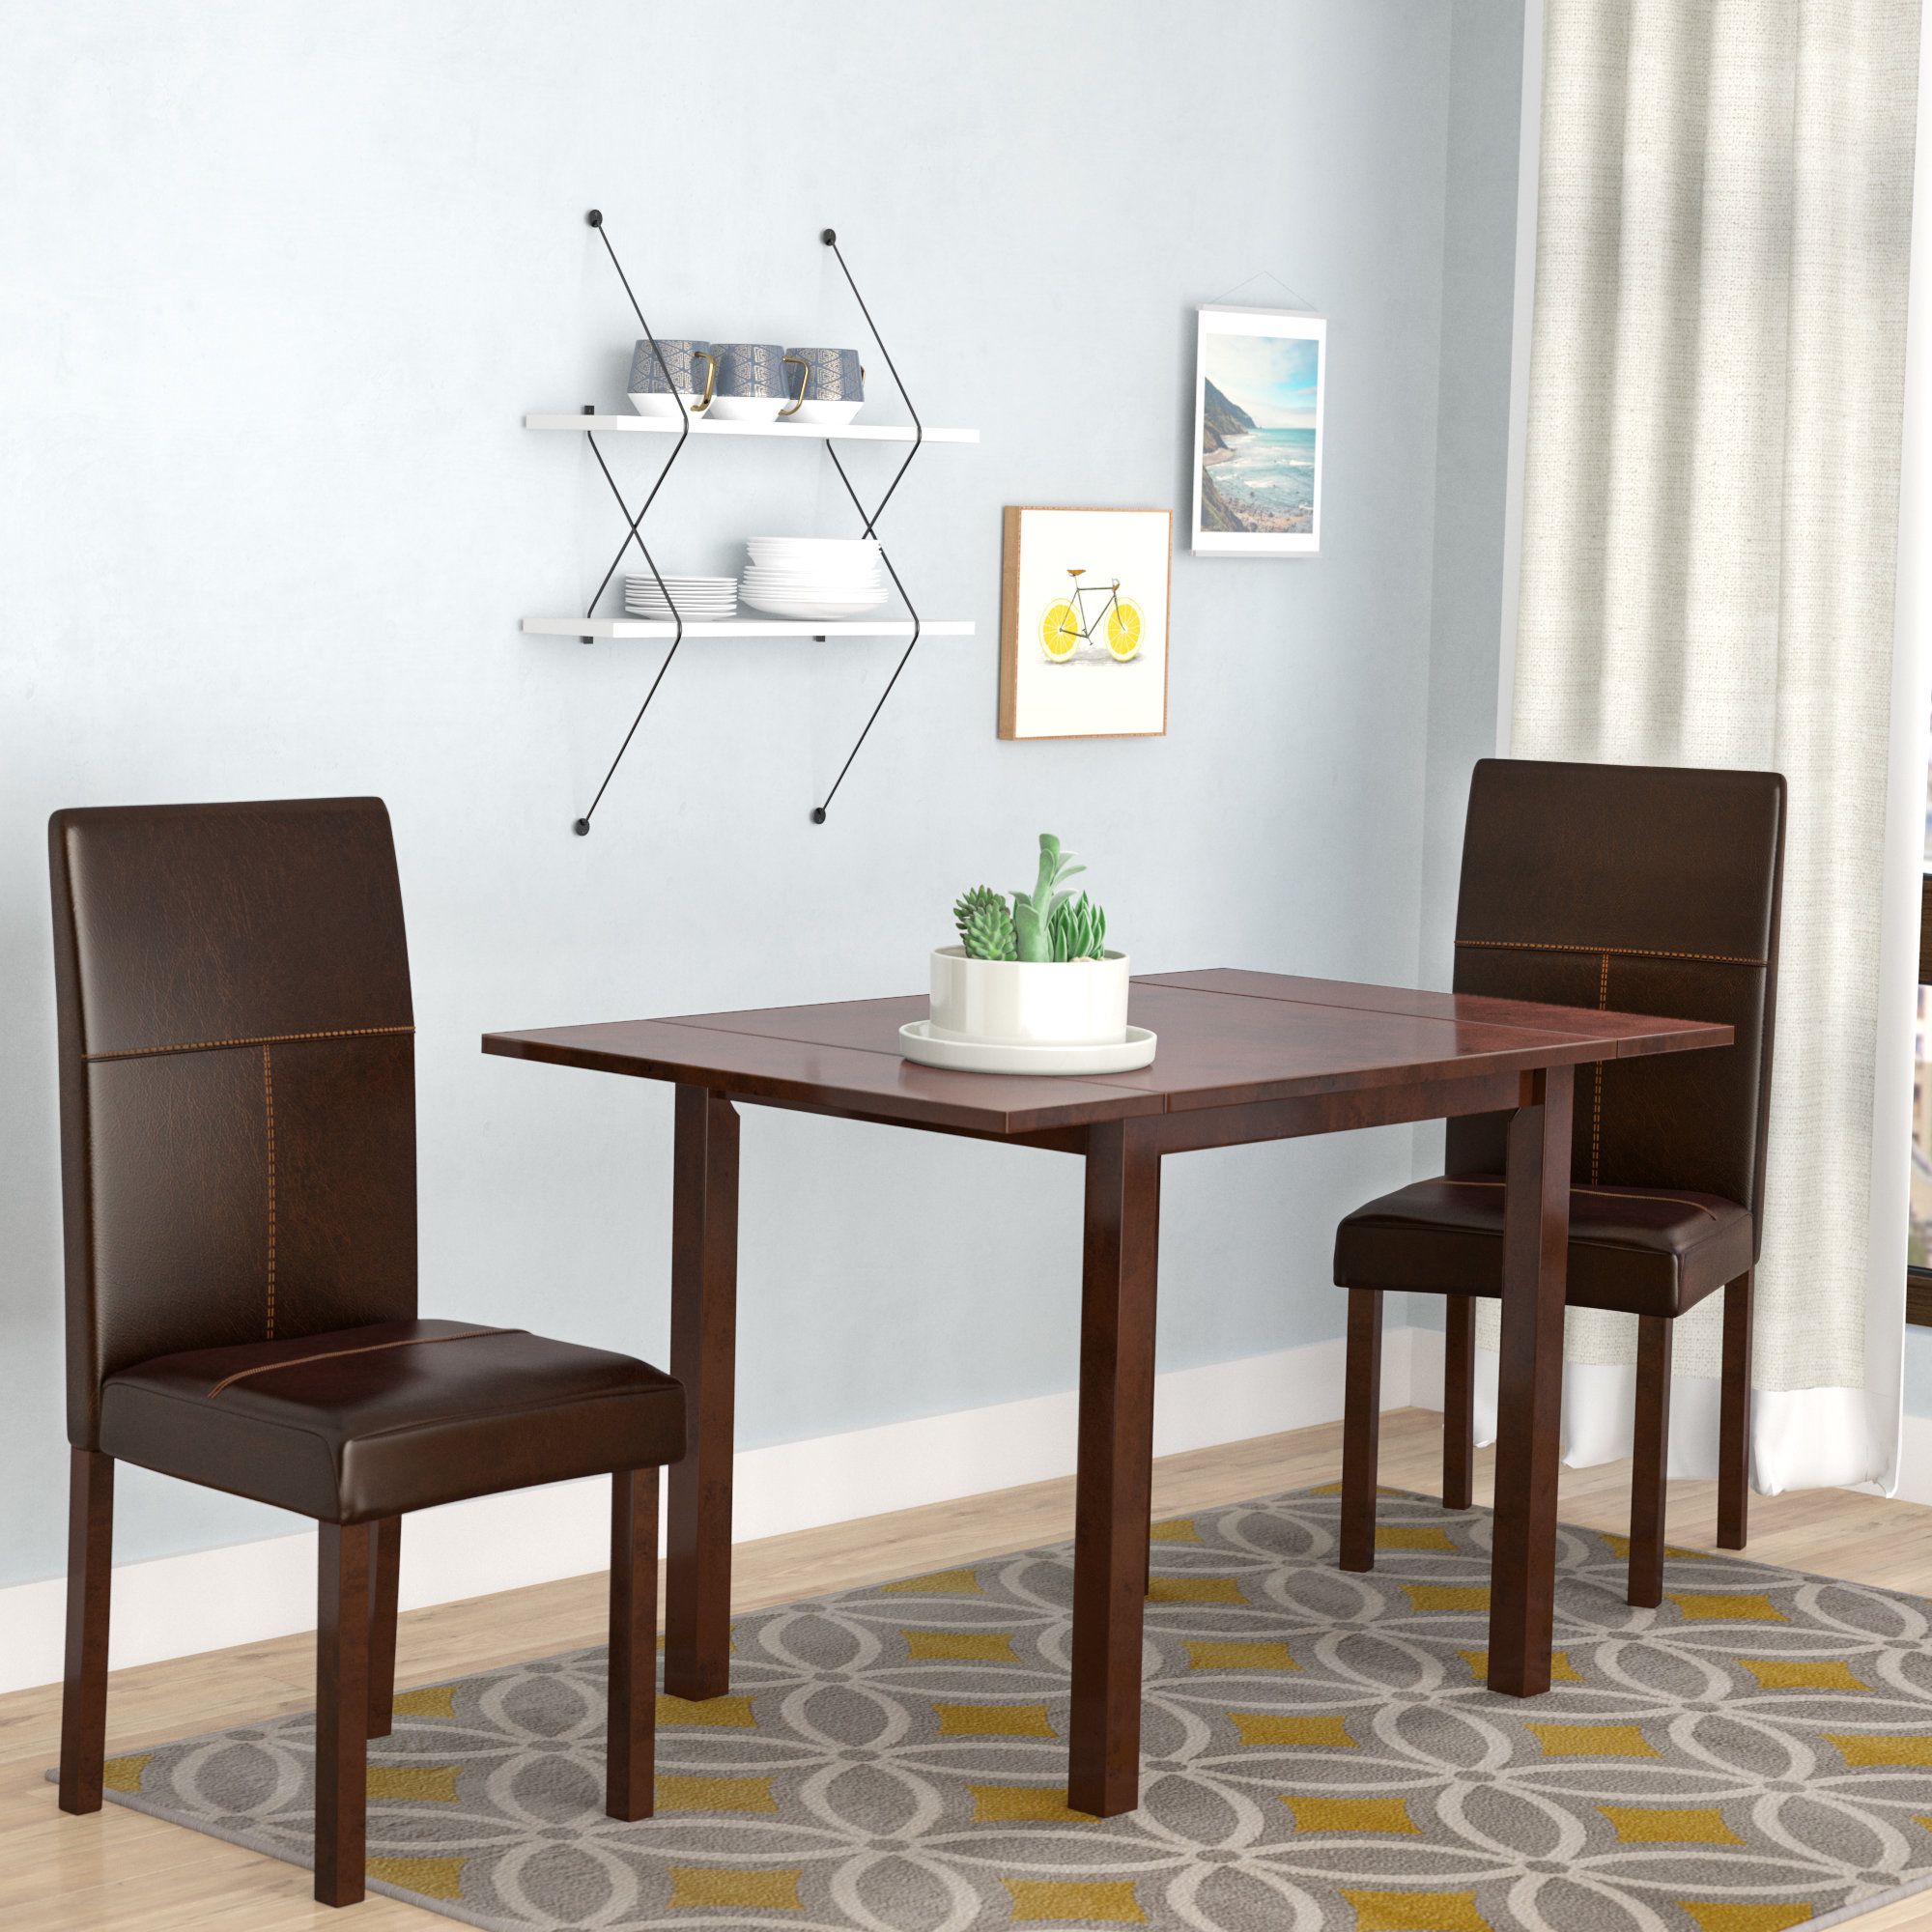 Lorenzen 3 Piece Dining Set With Regard To 2018 Ryker 3 Piece Dining Sets (View 9 of 20)